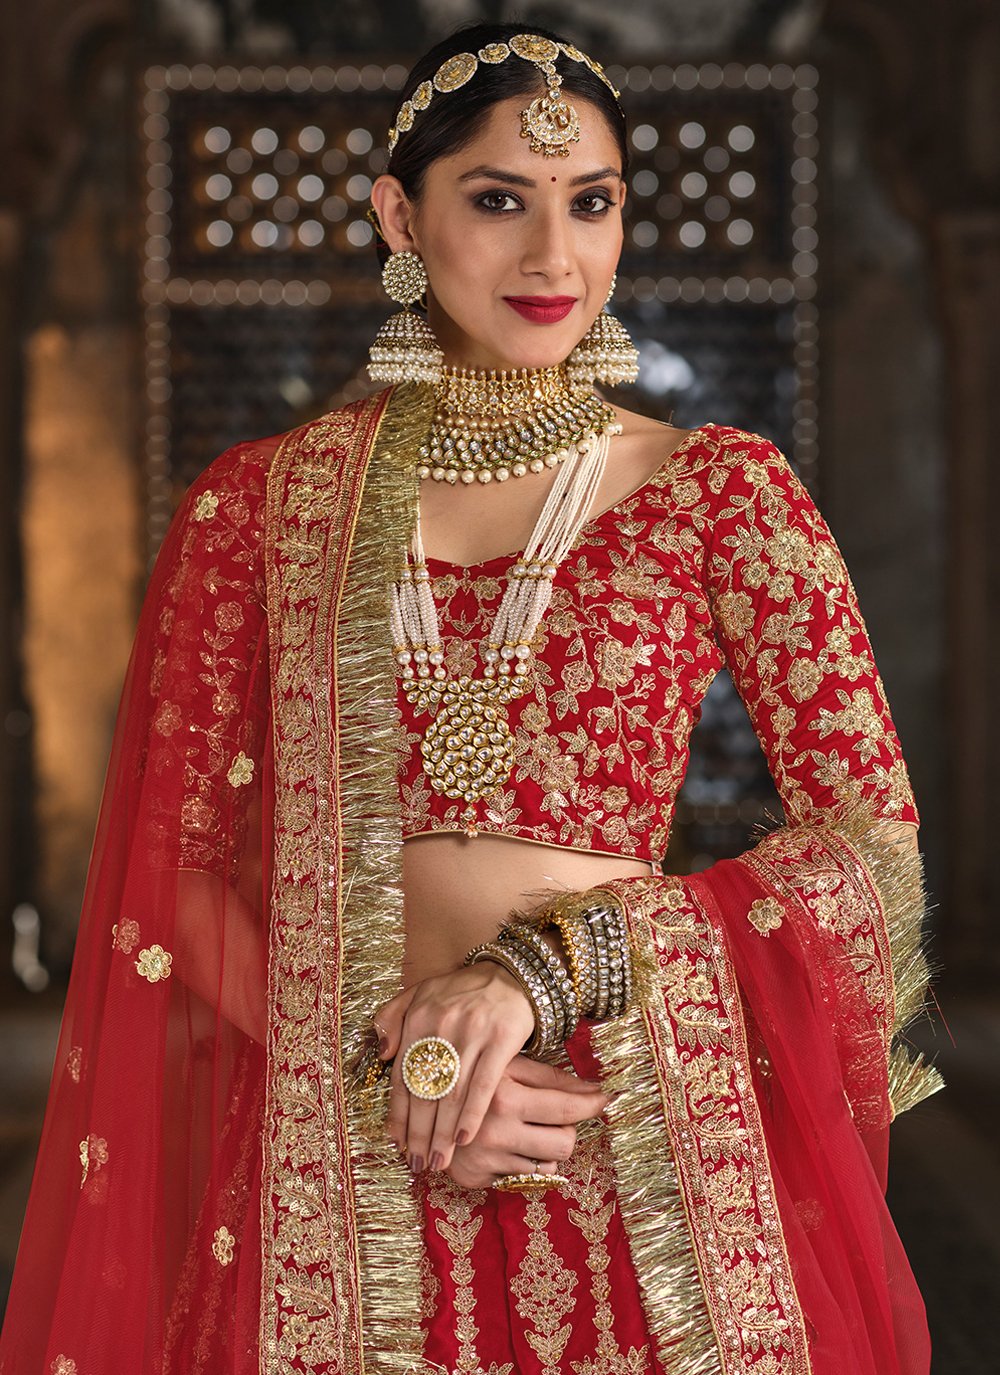 Best Jewellery Options to Match with your Red Bridal Lehenga | Bridal  jewellery design, Jewelry design, Jewellery design sketches